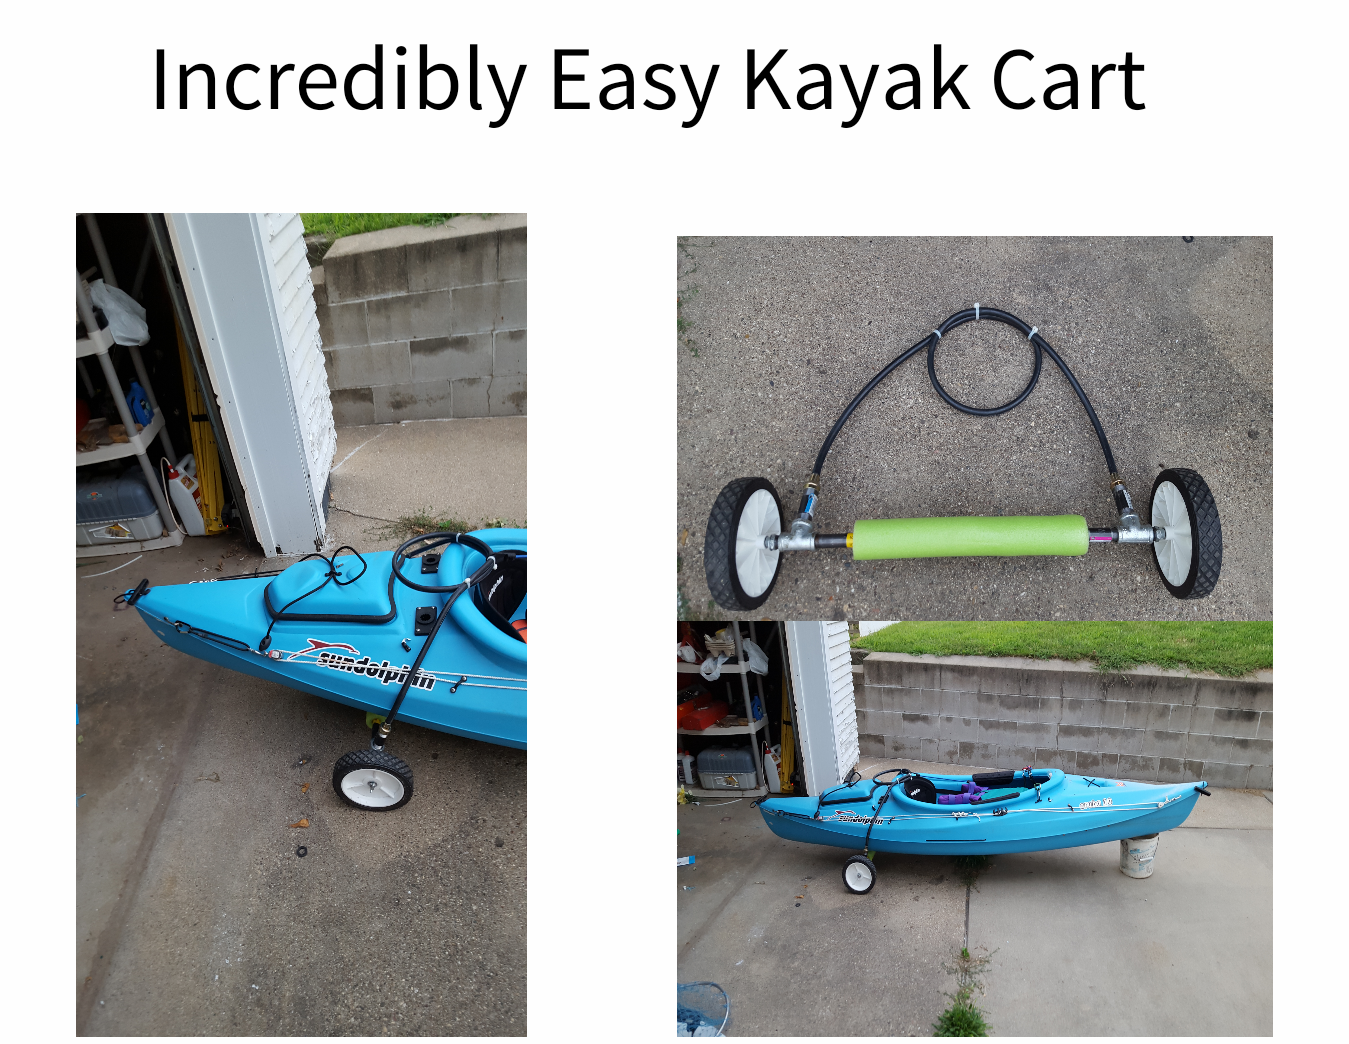 Kayaking For the Rest of Us.: The perfect portable kayak cart